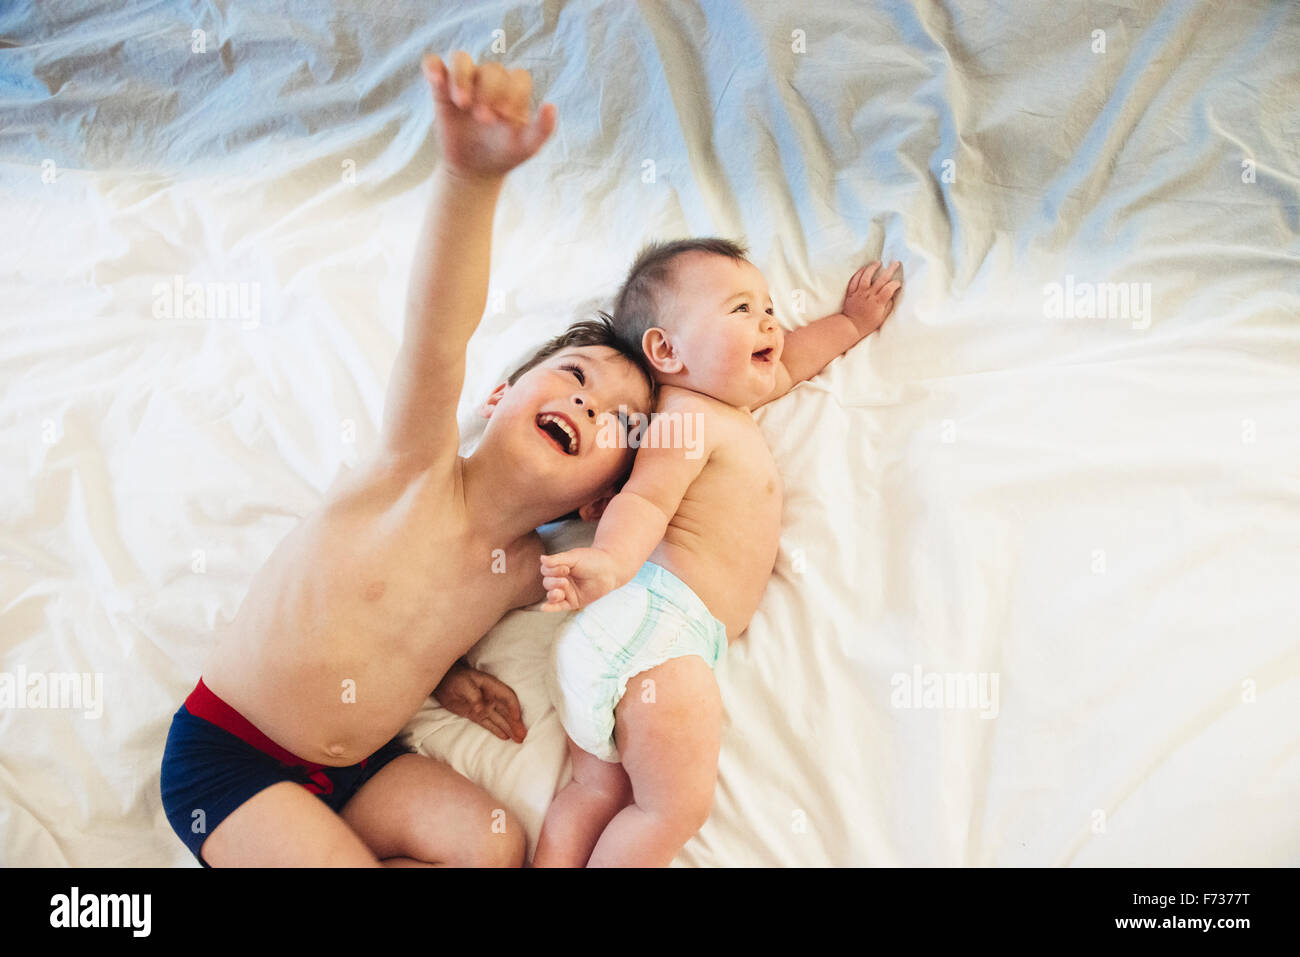 Two children, a brother and baby sister lying down playing together. Stock Photo